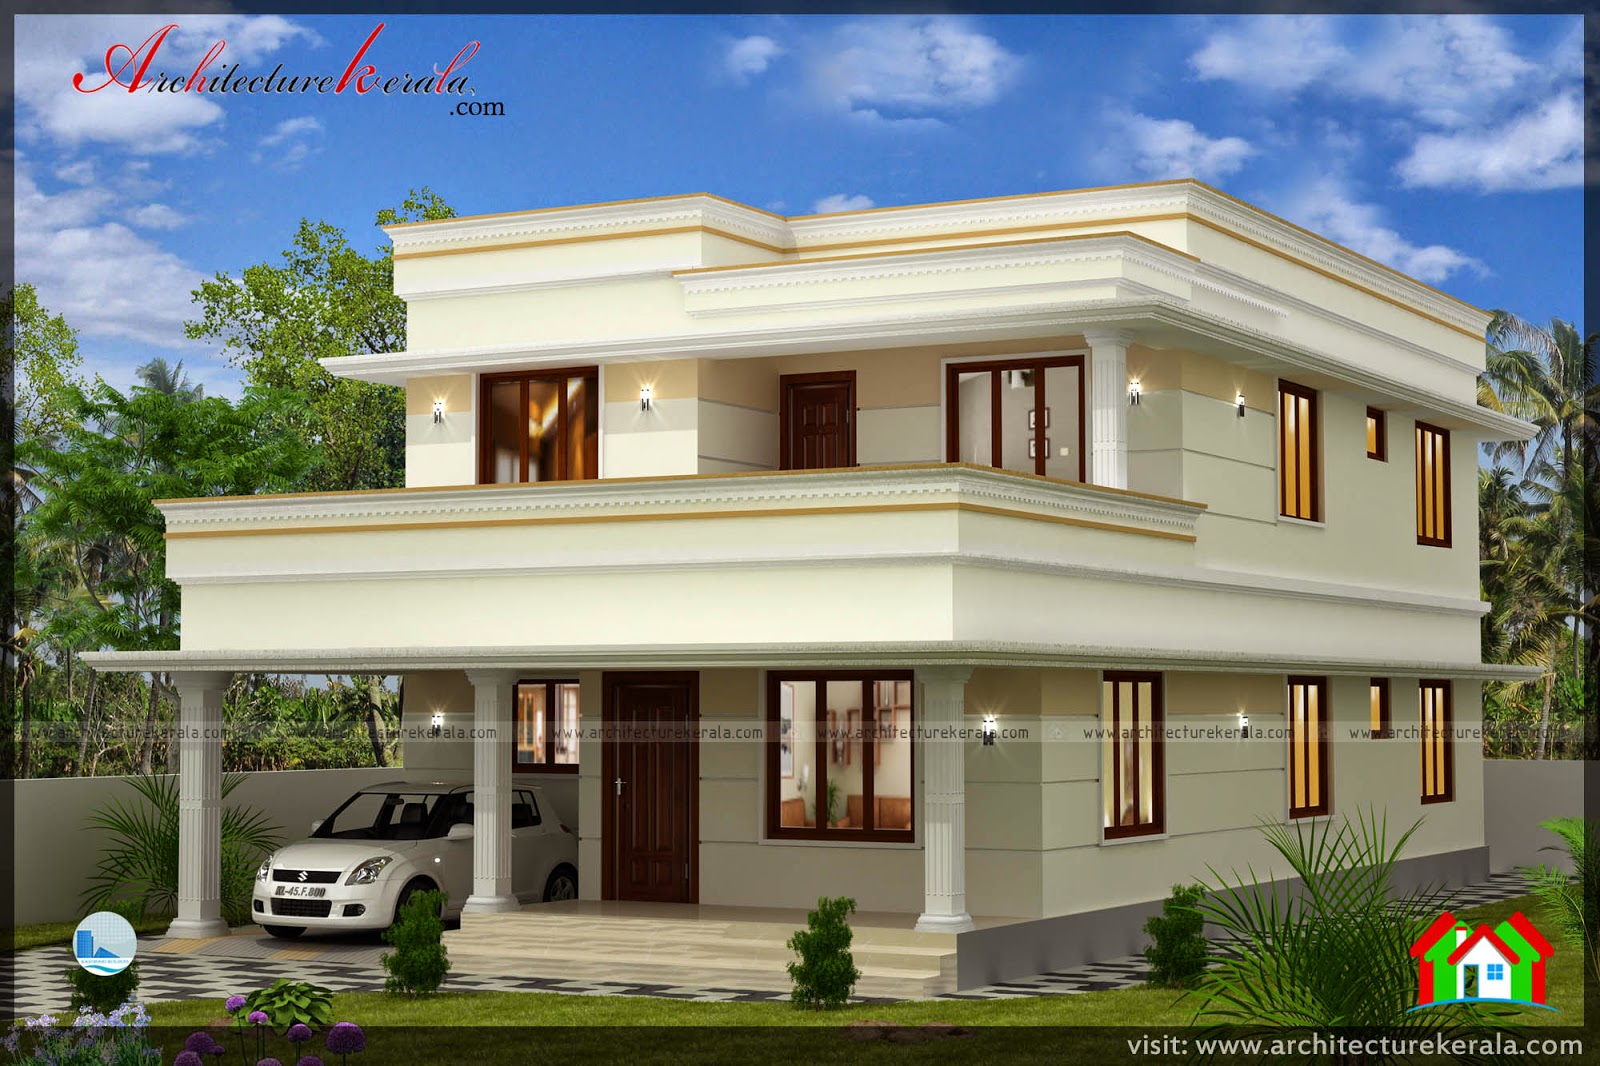  HOUSE  PLAN  4 BEDROOMS  ARCHITECTURE KERALA 